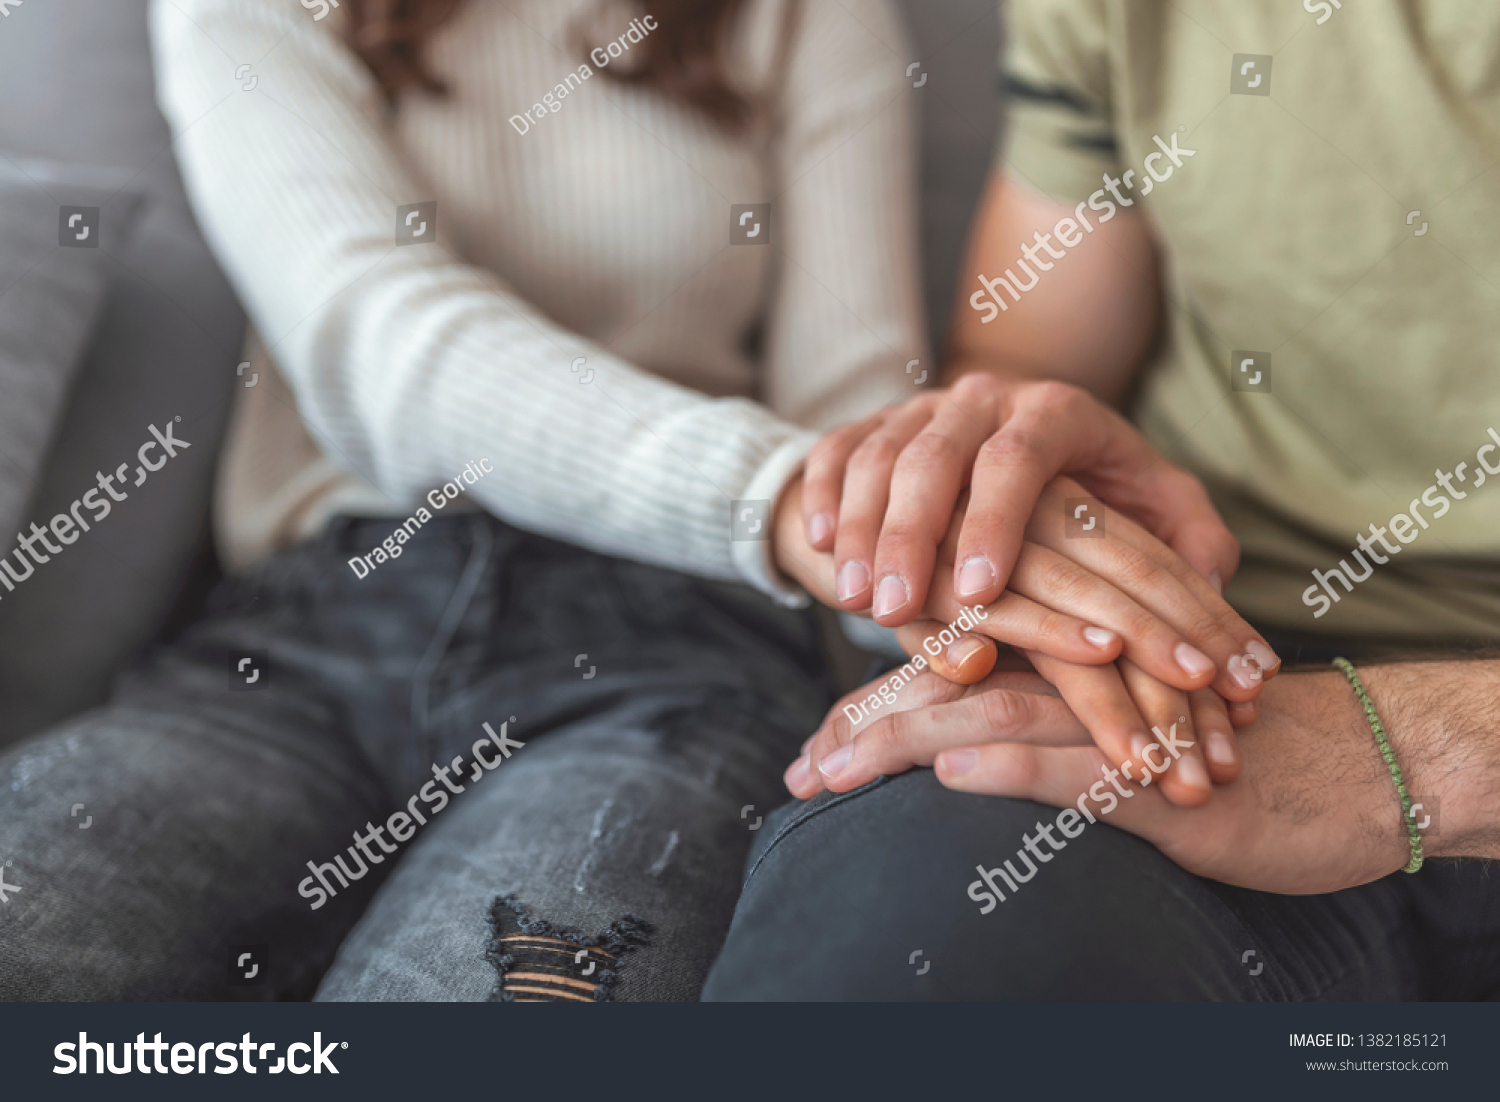 Cropped shot of couple holding hands while sitting together at home.Focus on hands. Closeup view of couple holding hands, loving wife supporting or comforting husband ready to help expressing sympathy #1382185121